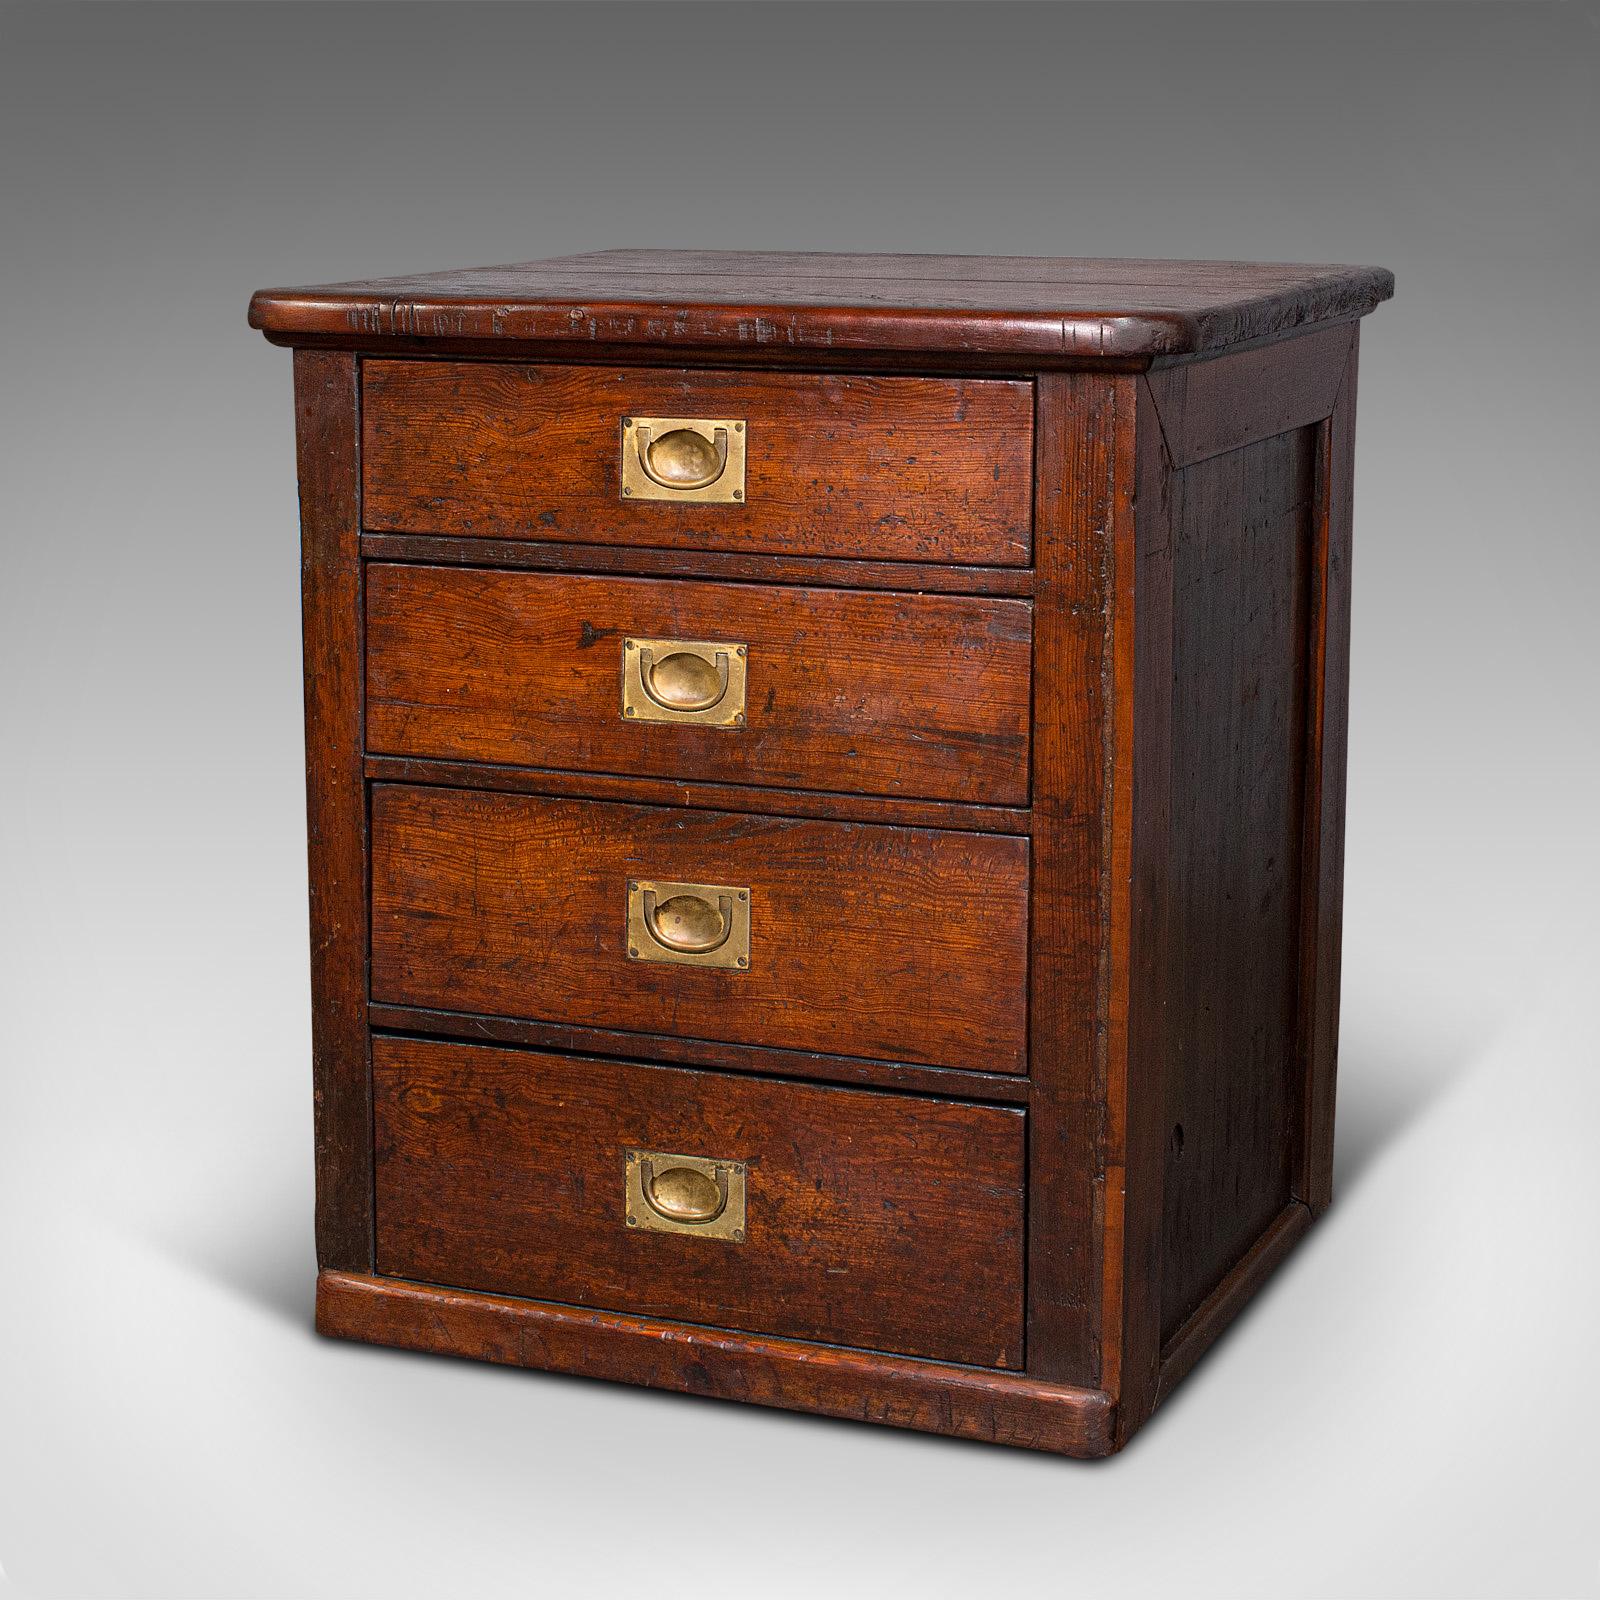 British Antique Campaign Chest of Drawers, English, Pitch Pine, Shop Retail, Victorian For Sale